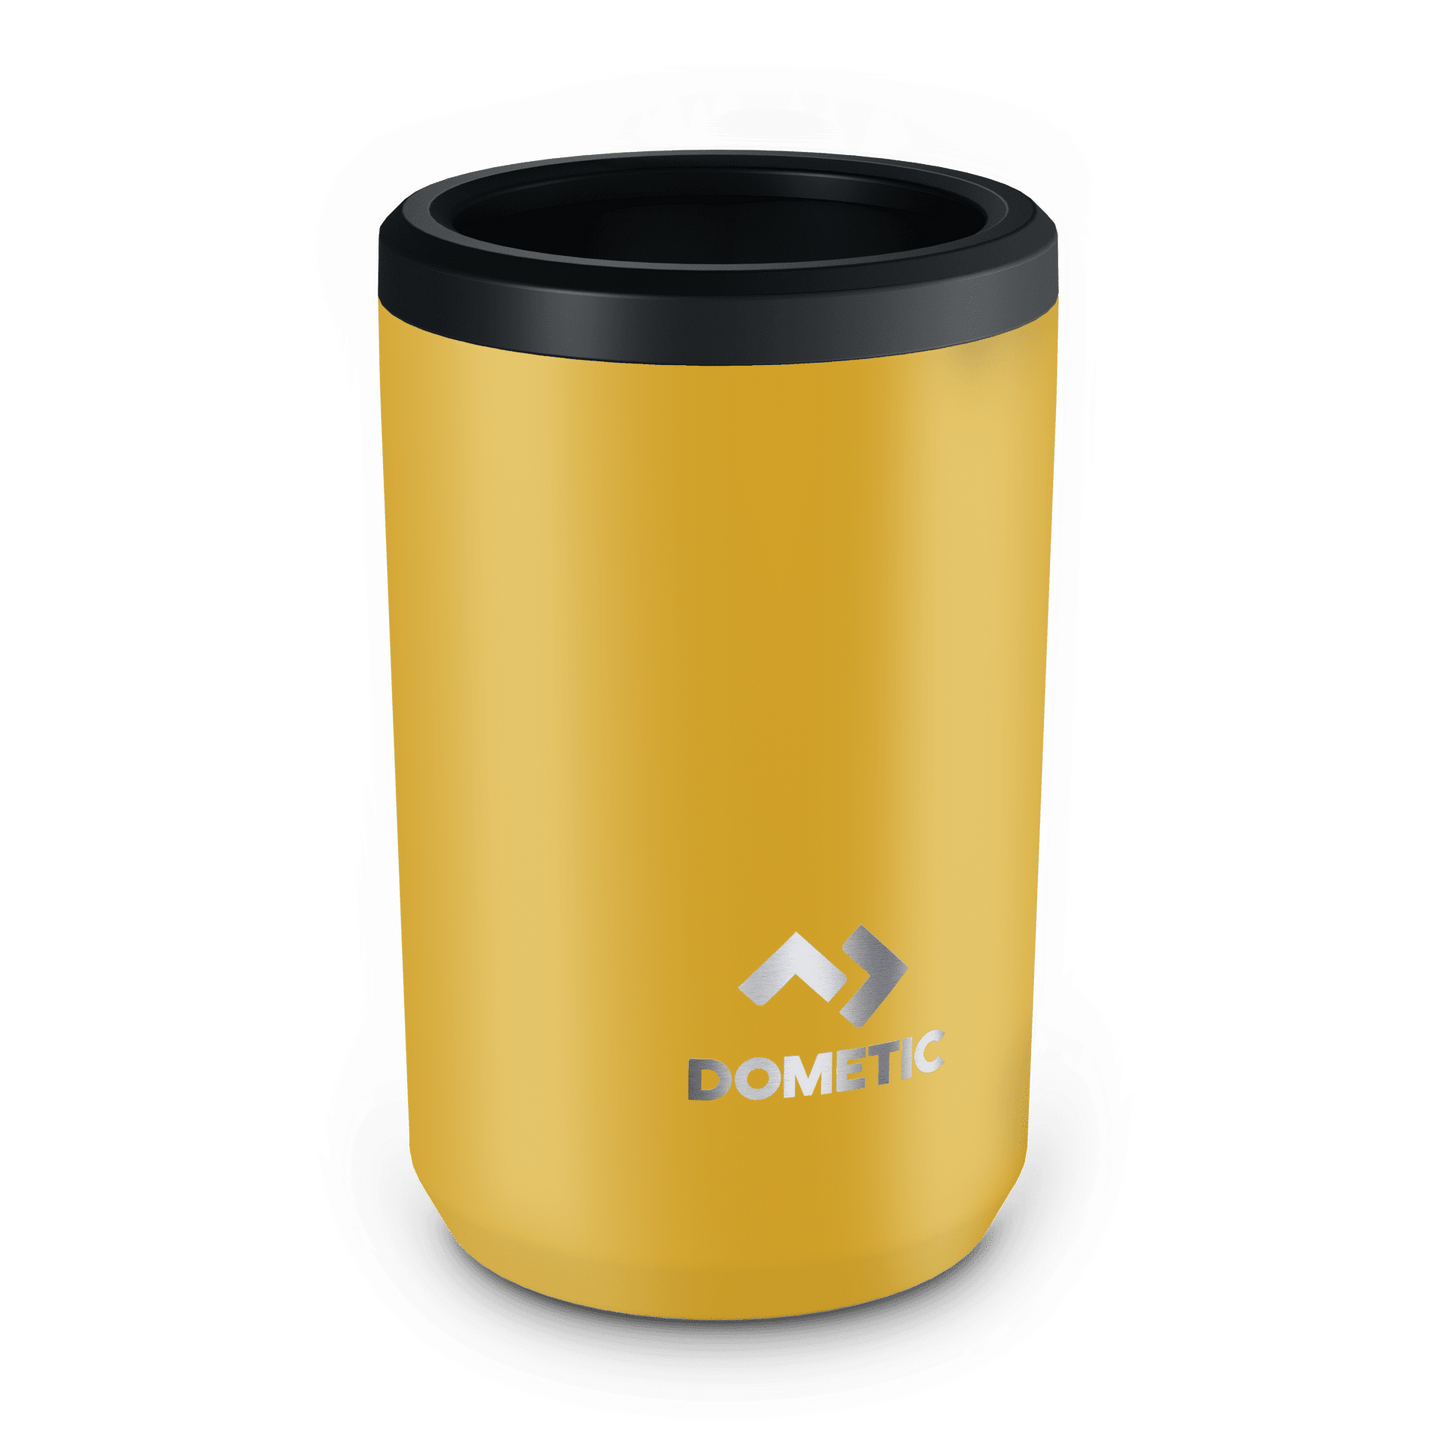 Dometic Insulated Stubbie Holder - Glow